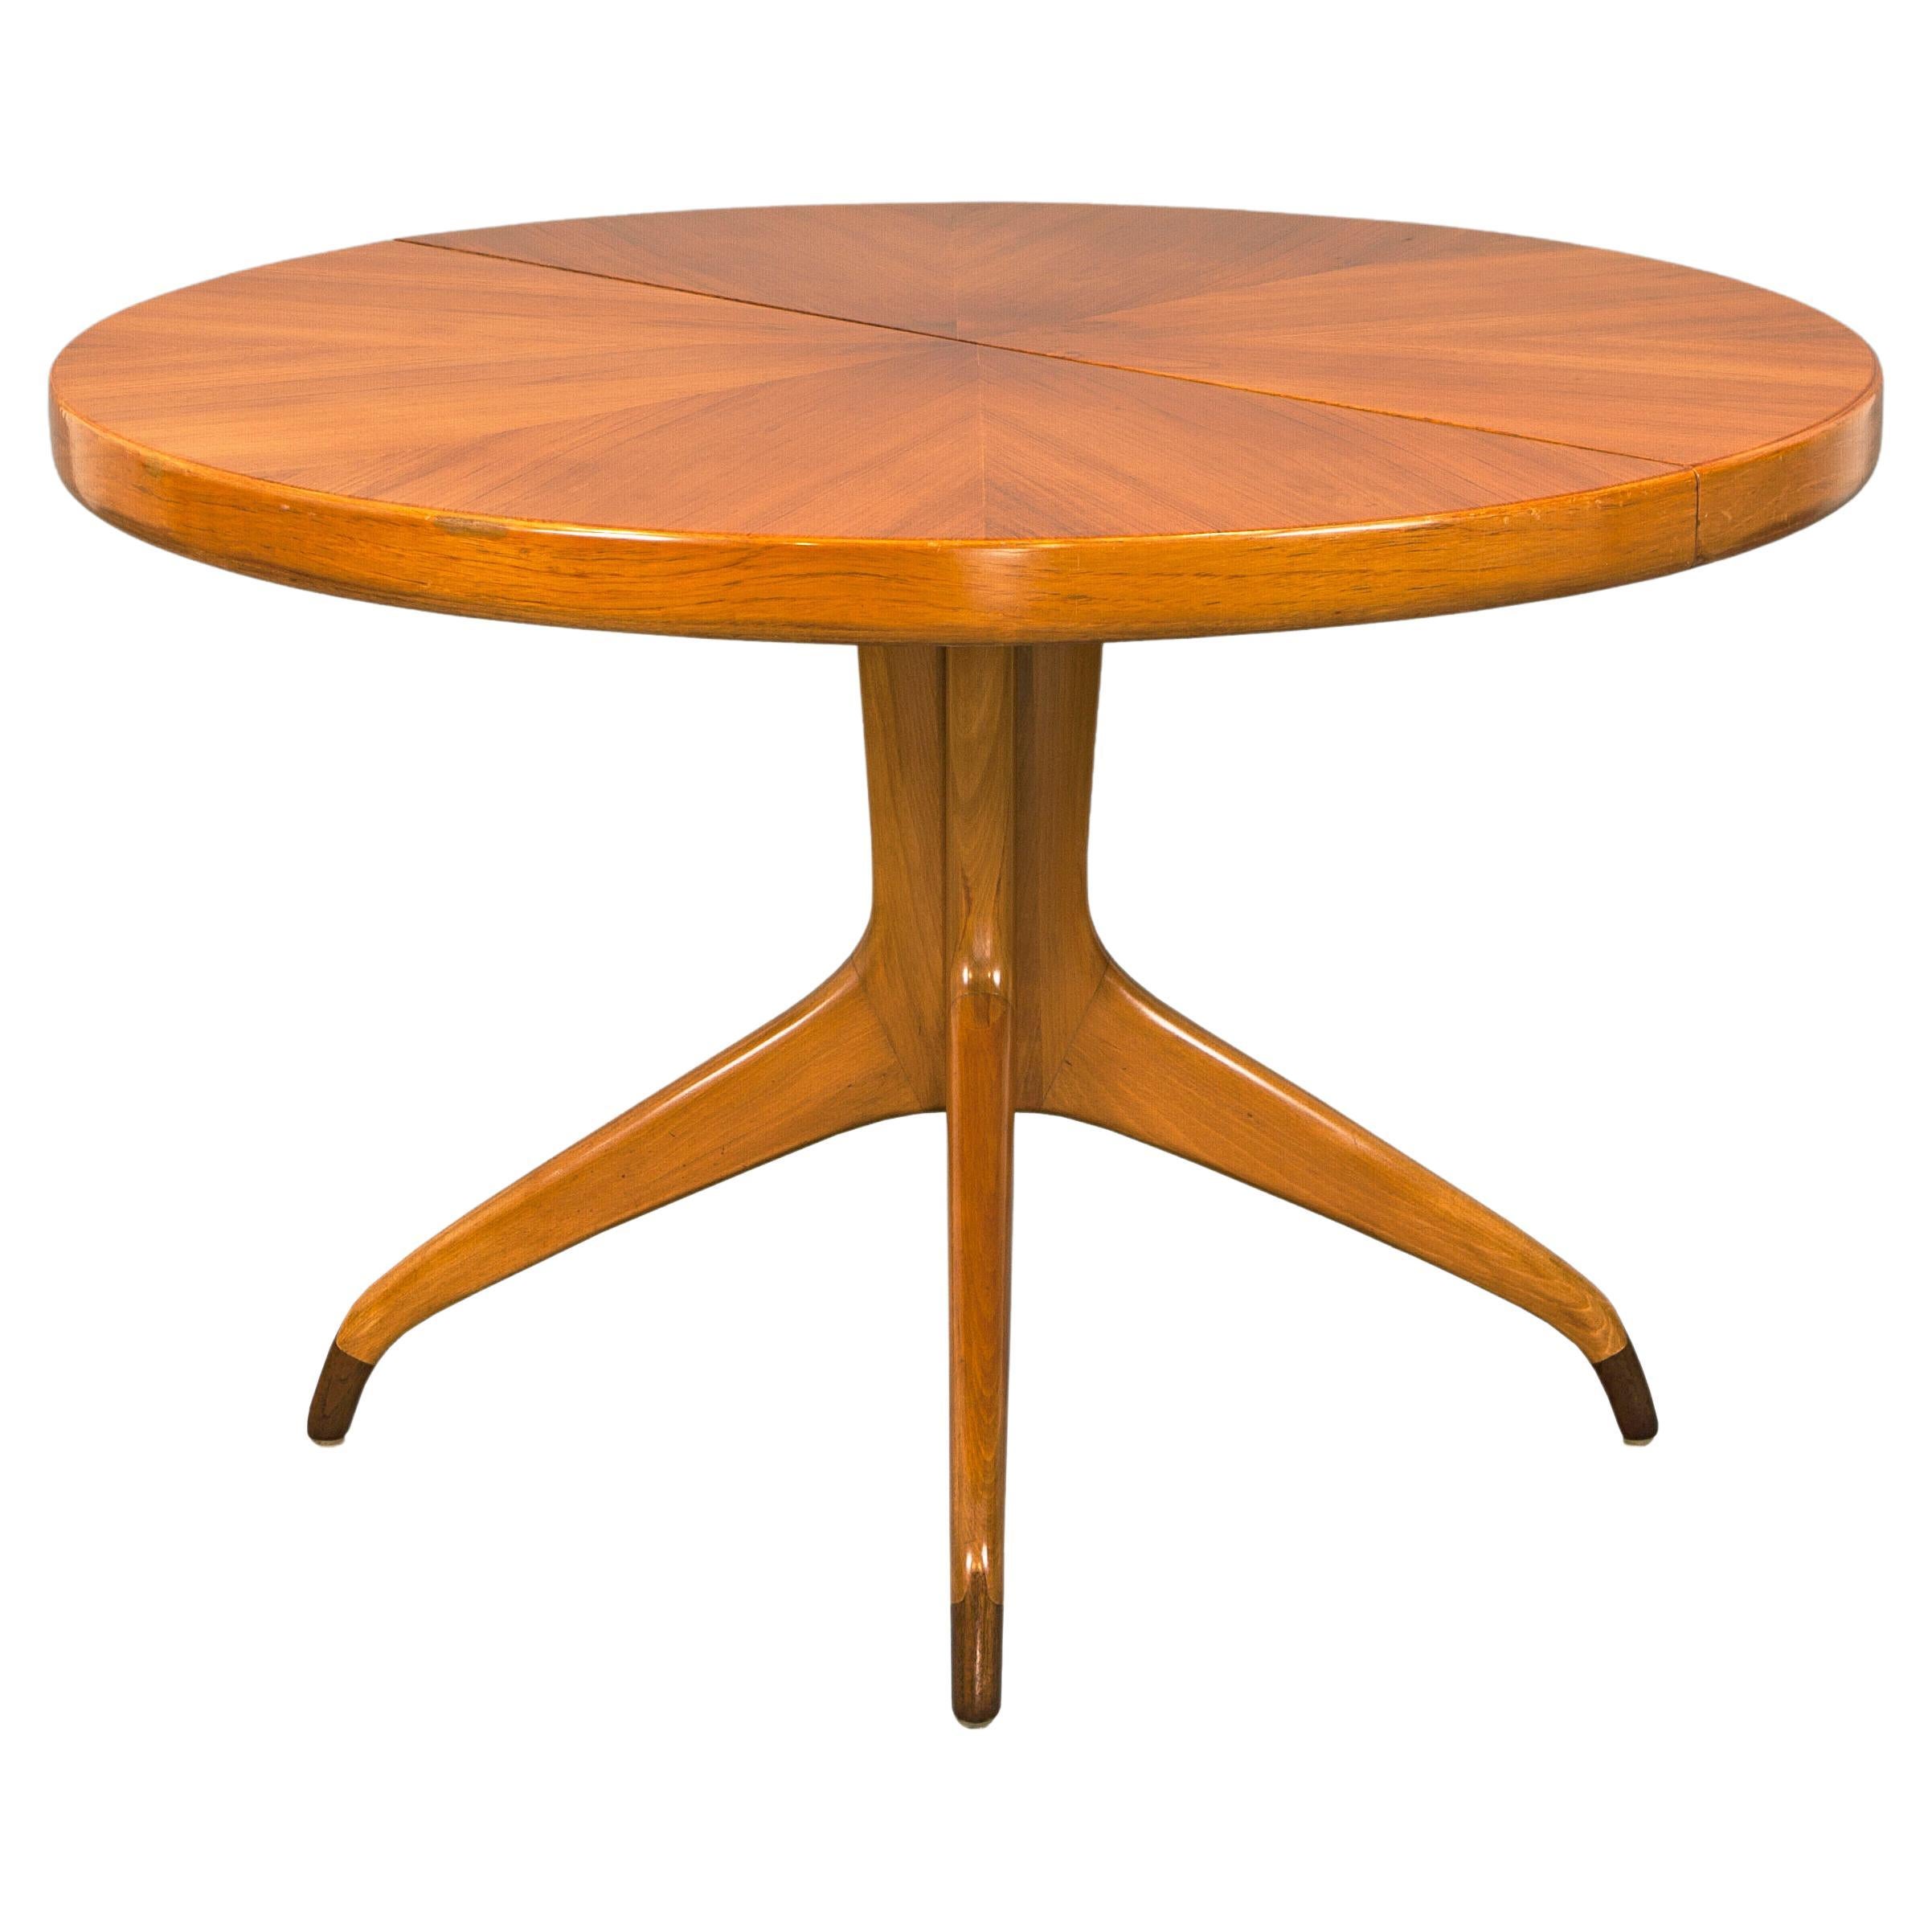 1950's David Rosen Round Dining Table in Teak and Rosewood